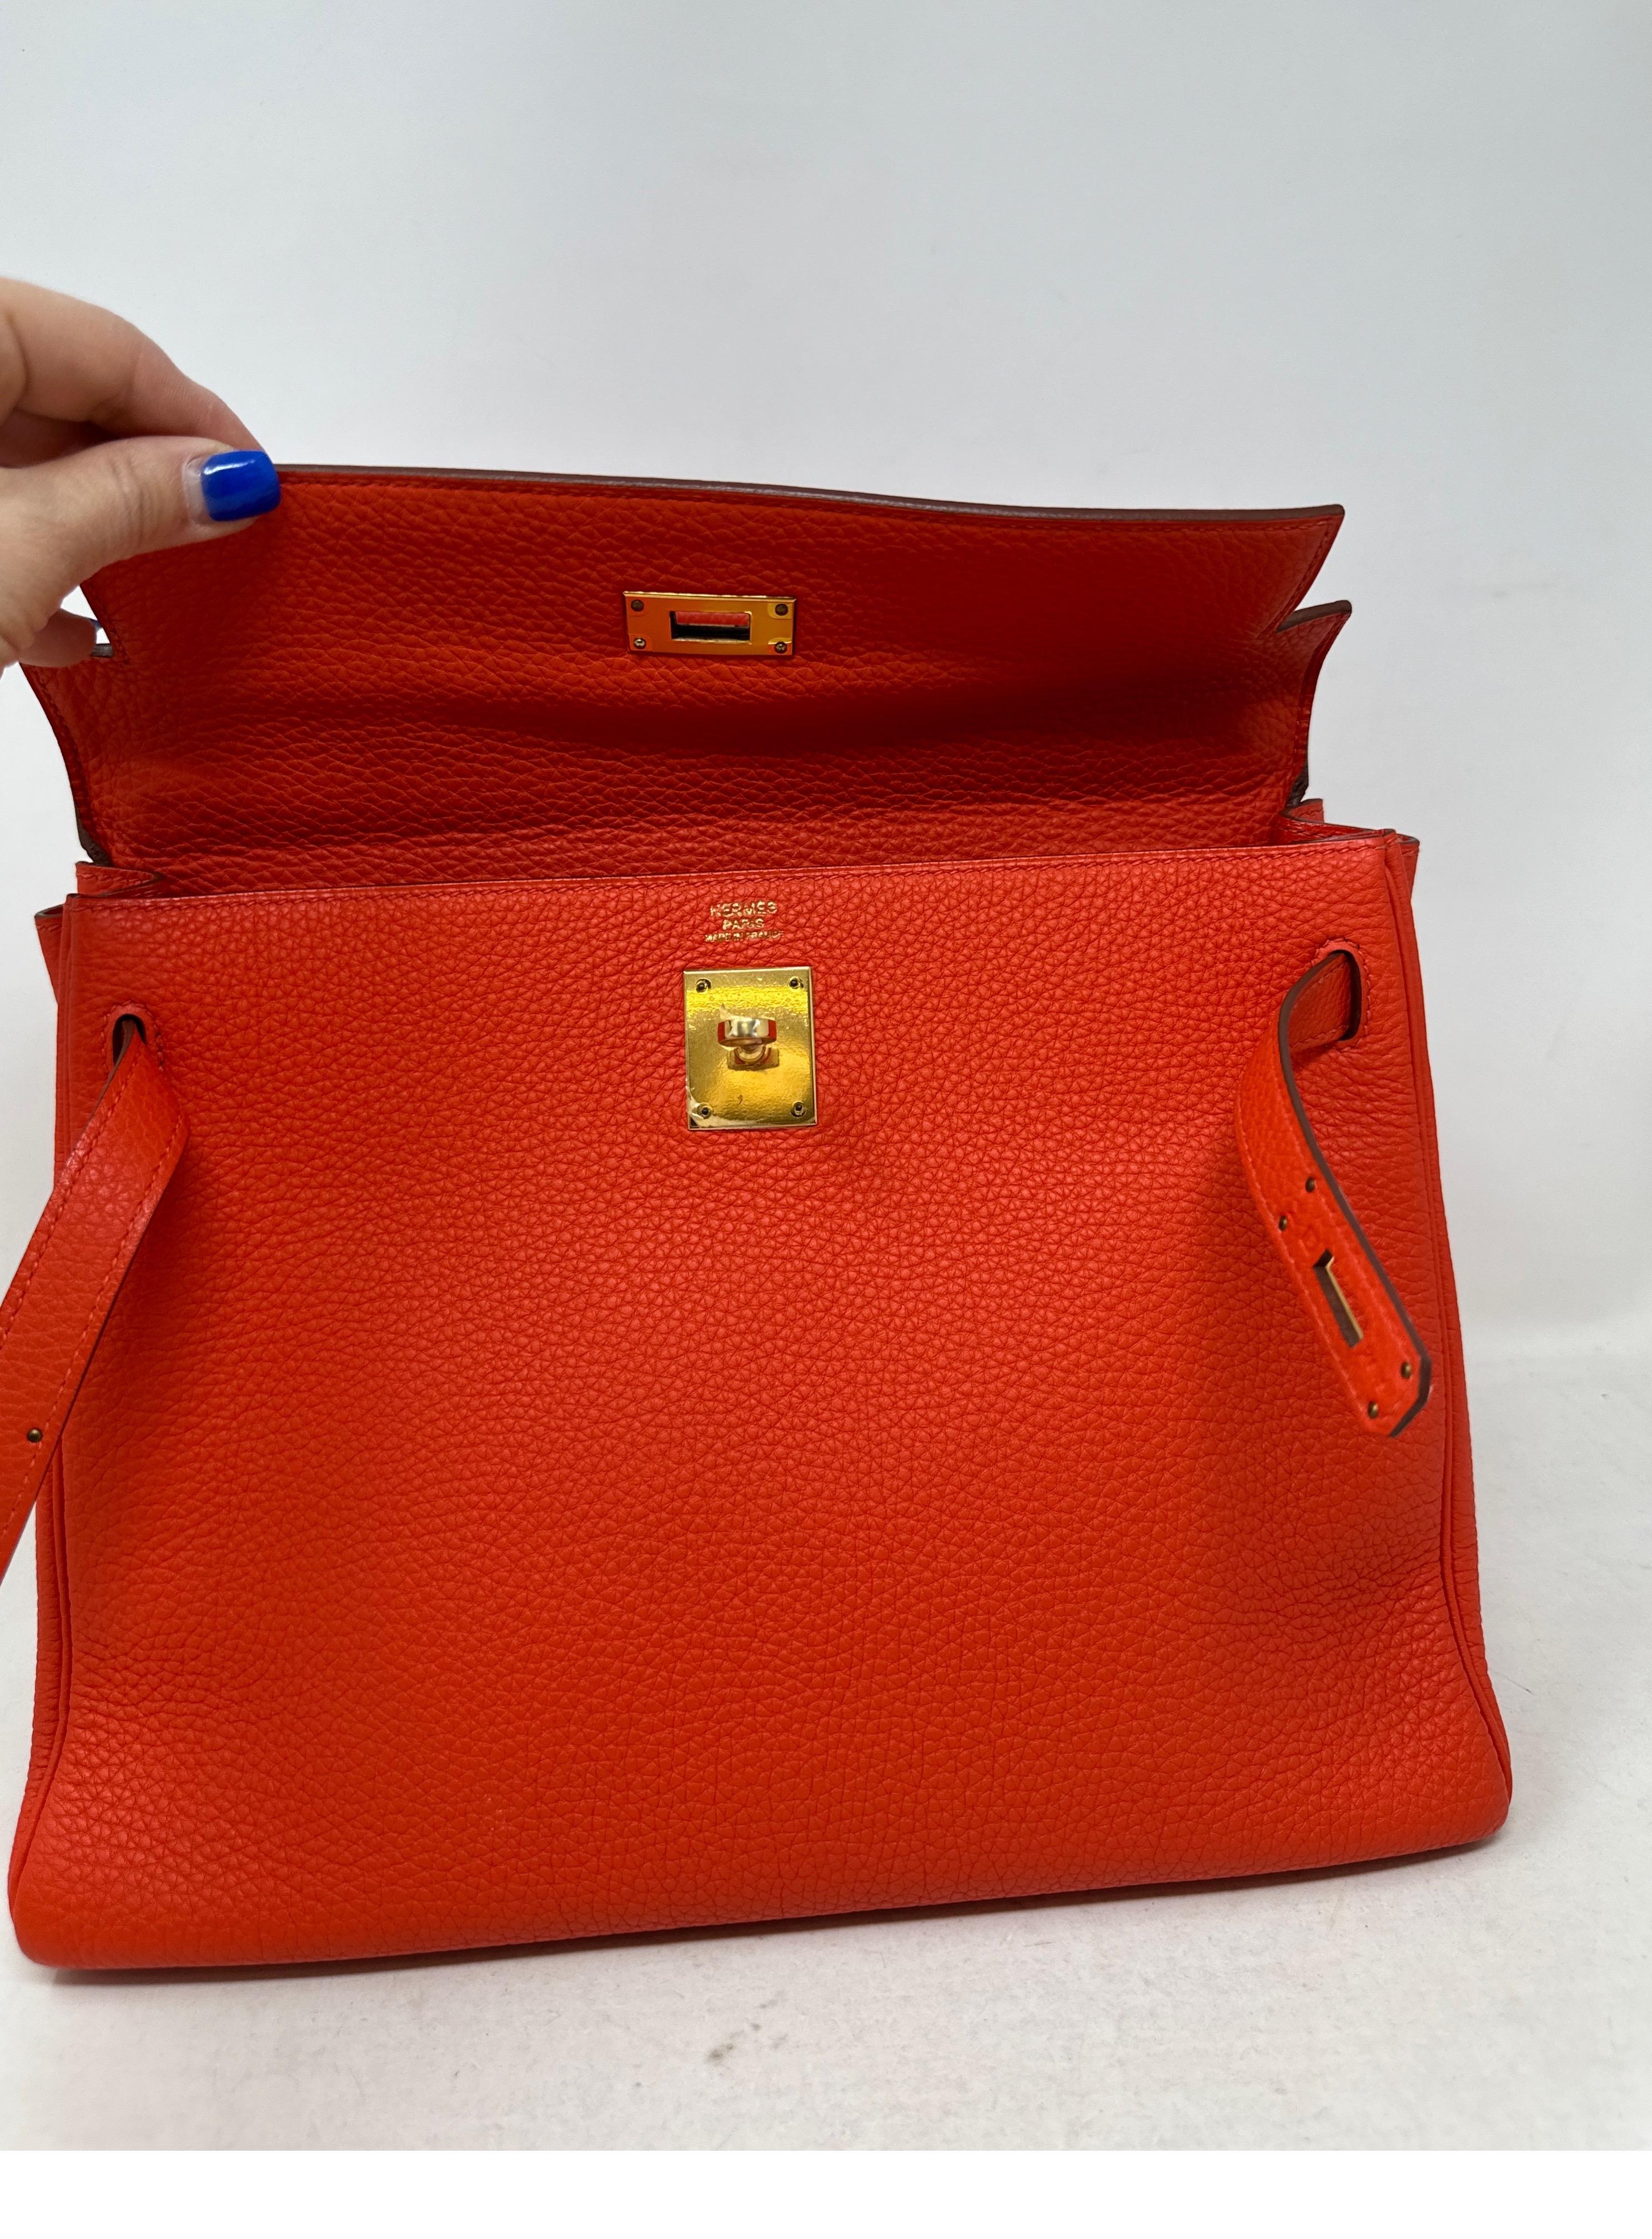 Hermes Capucine Kelly 32 Bag  In Excellent Condition For Sale In Athens, GA